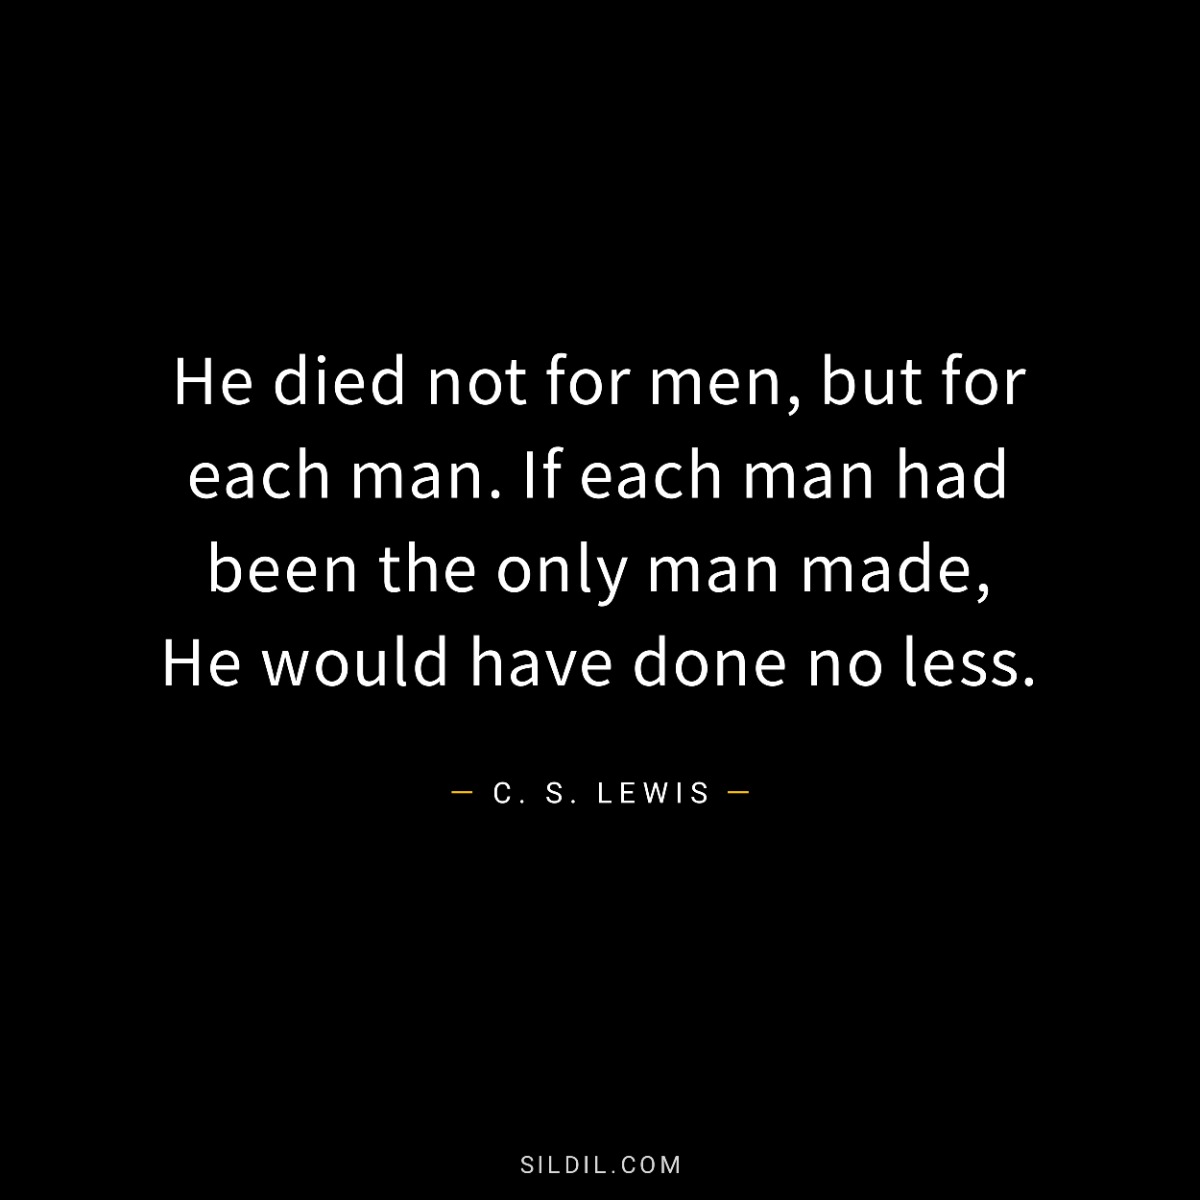 He died not for men, but for each man. If each man had been the only man made, He would have done no less.